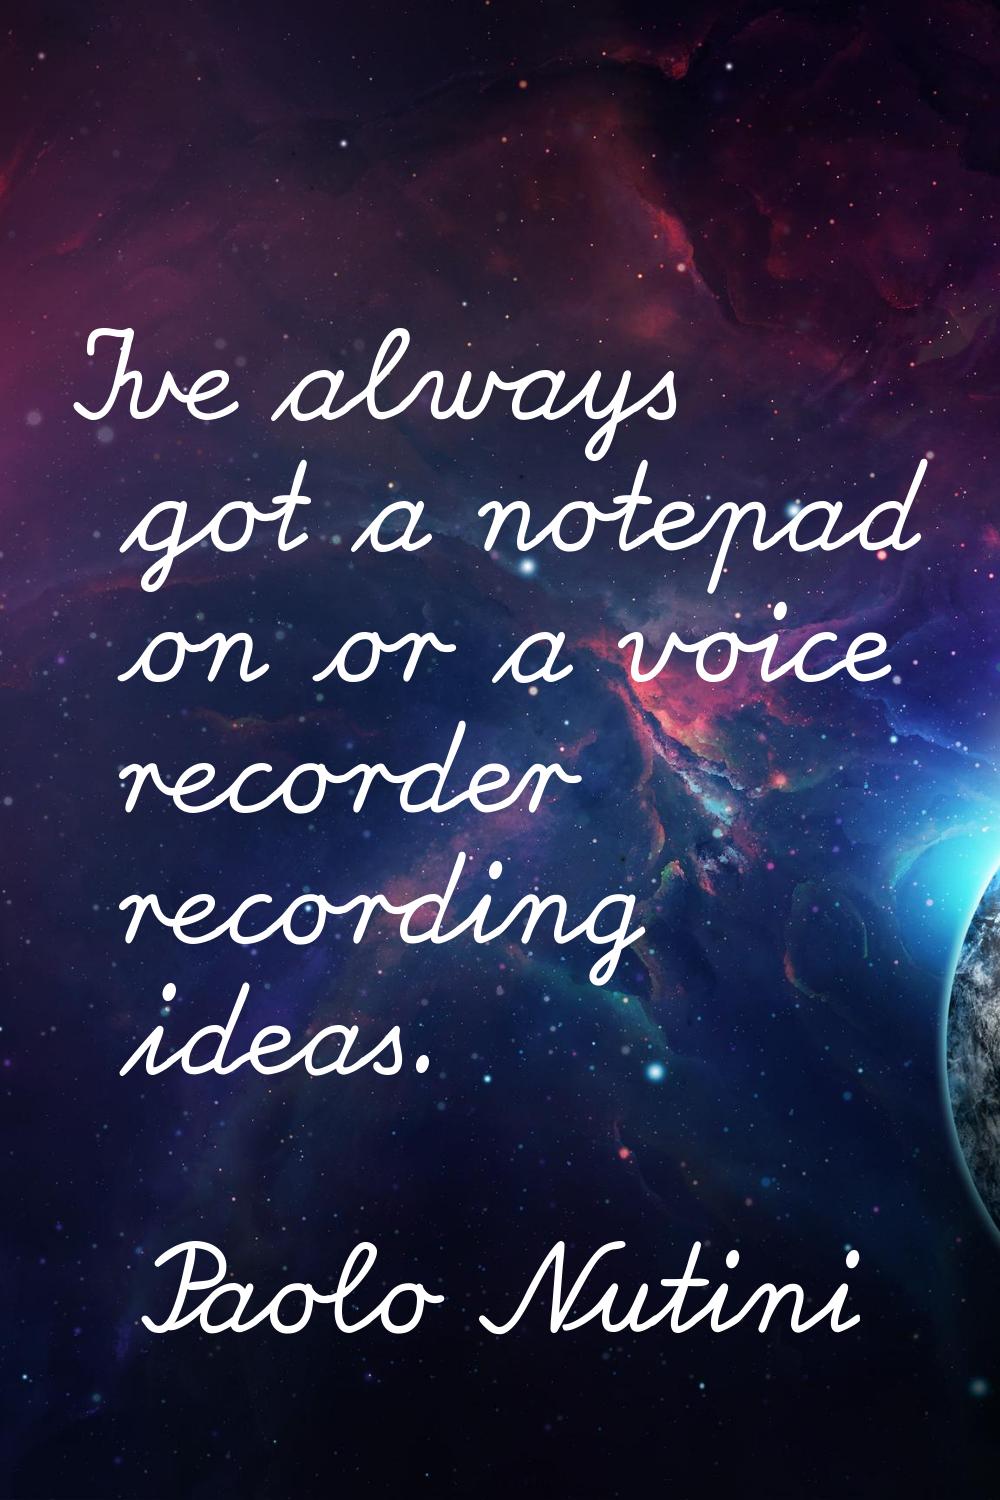 I've always got a notepad on or a voice recorder recording ideas.